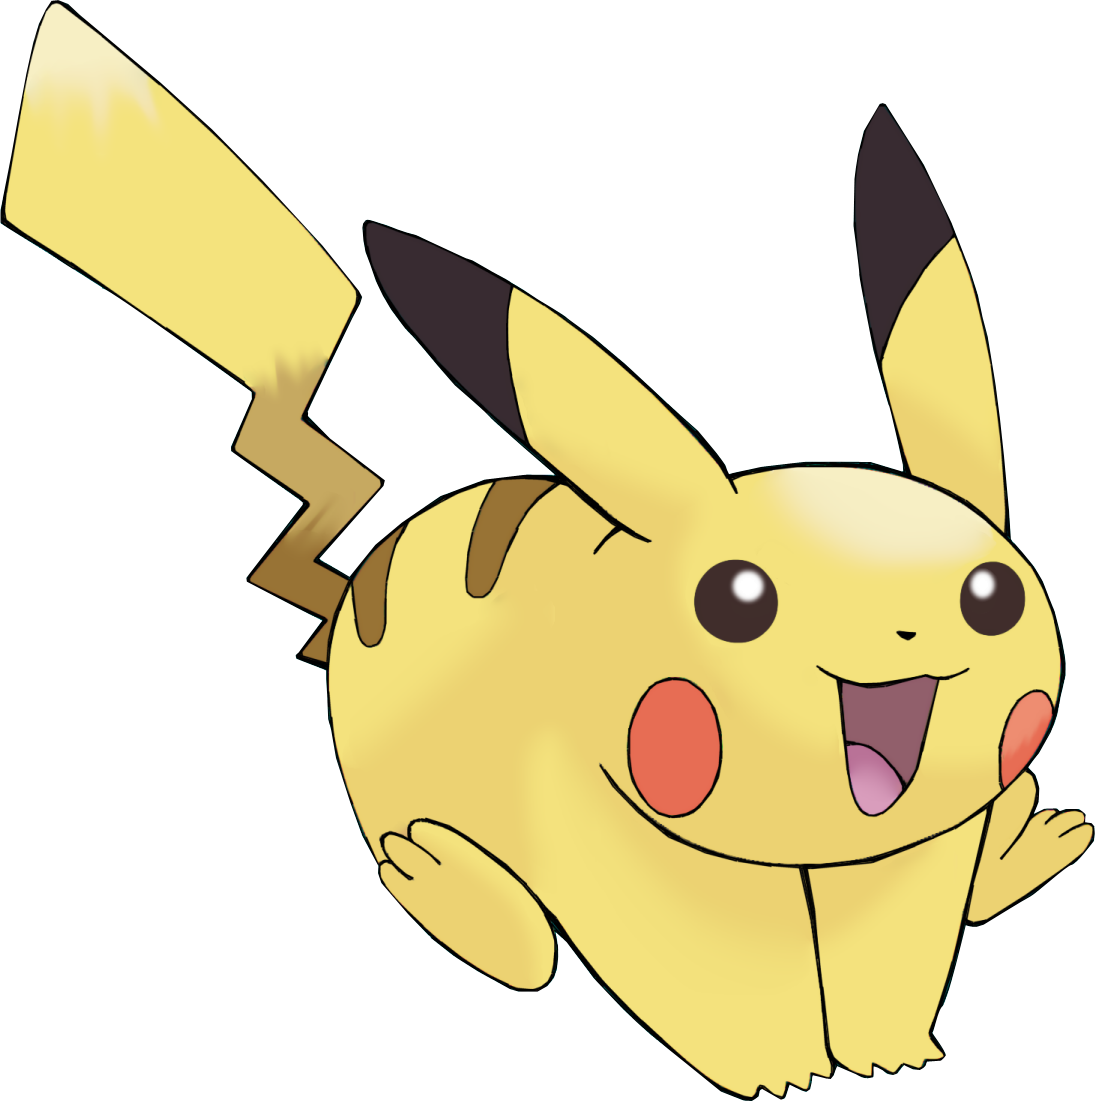 Pokemon Png Image - Pikachu Running To The Right (1095x1101)